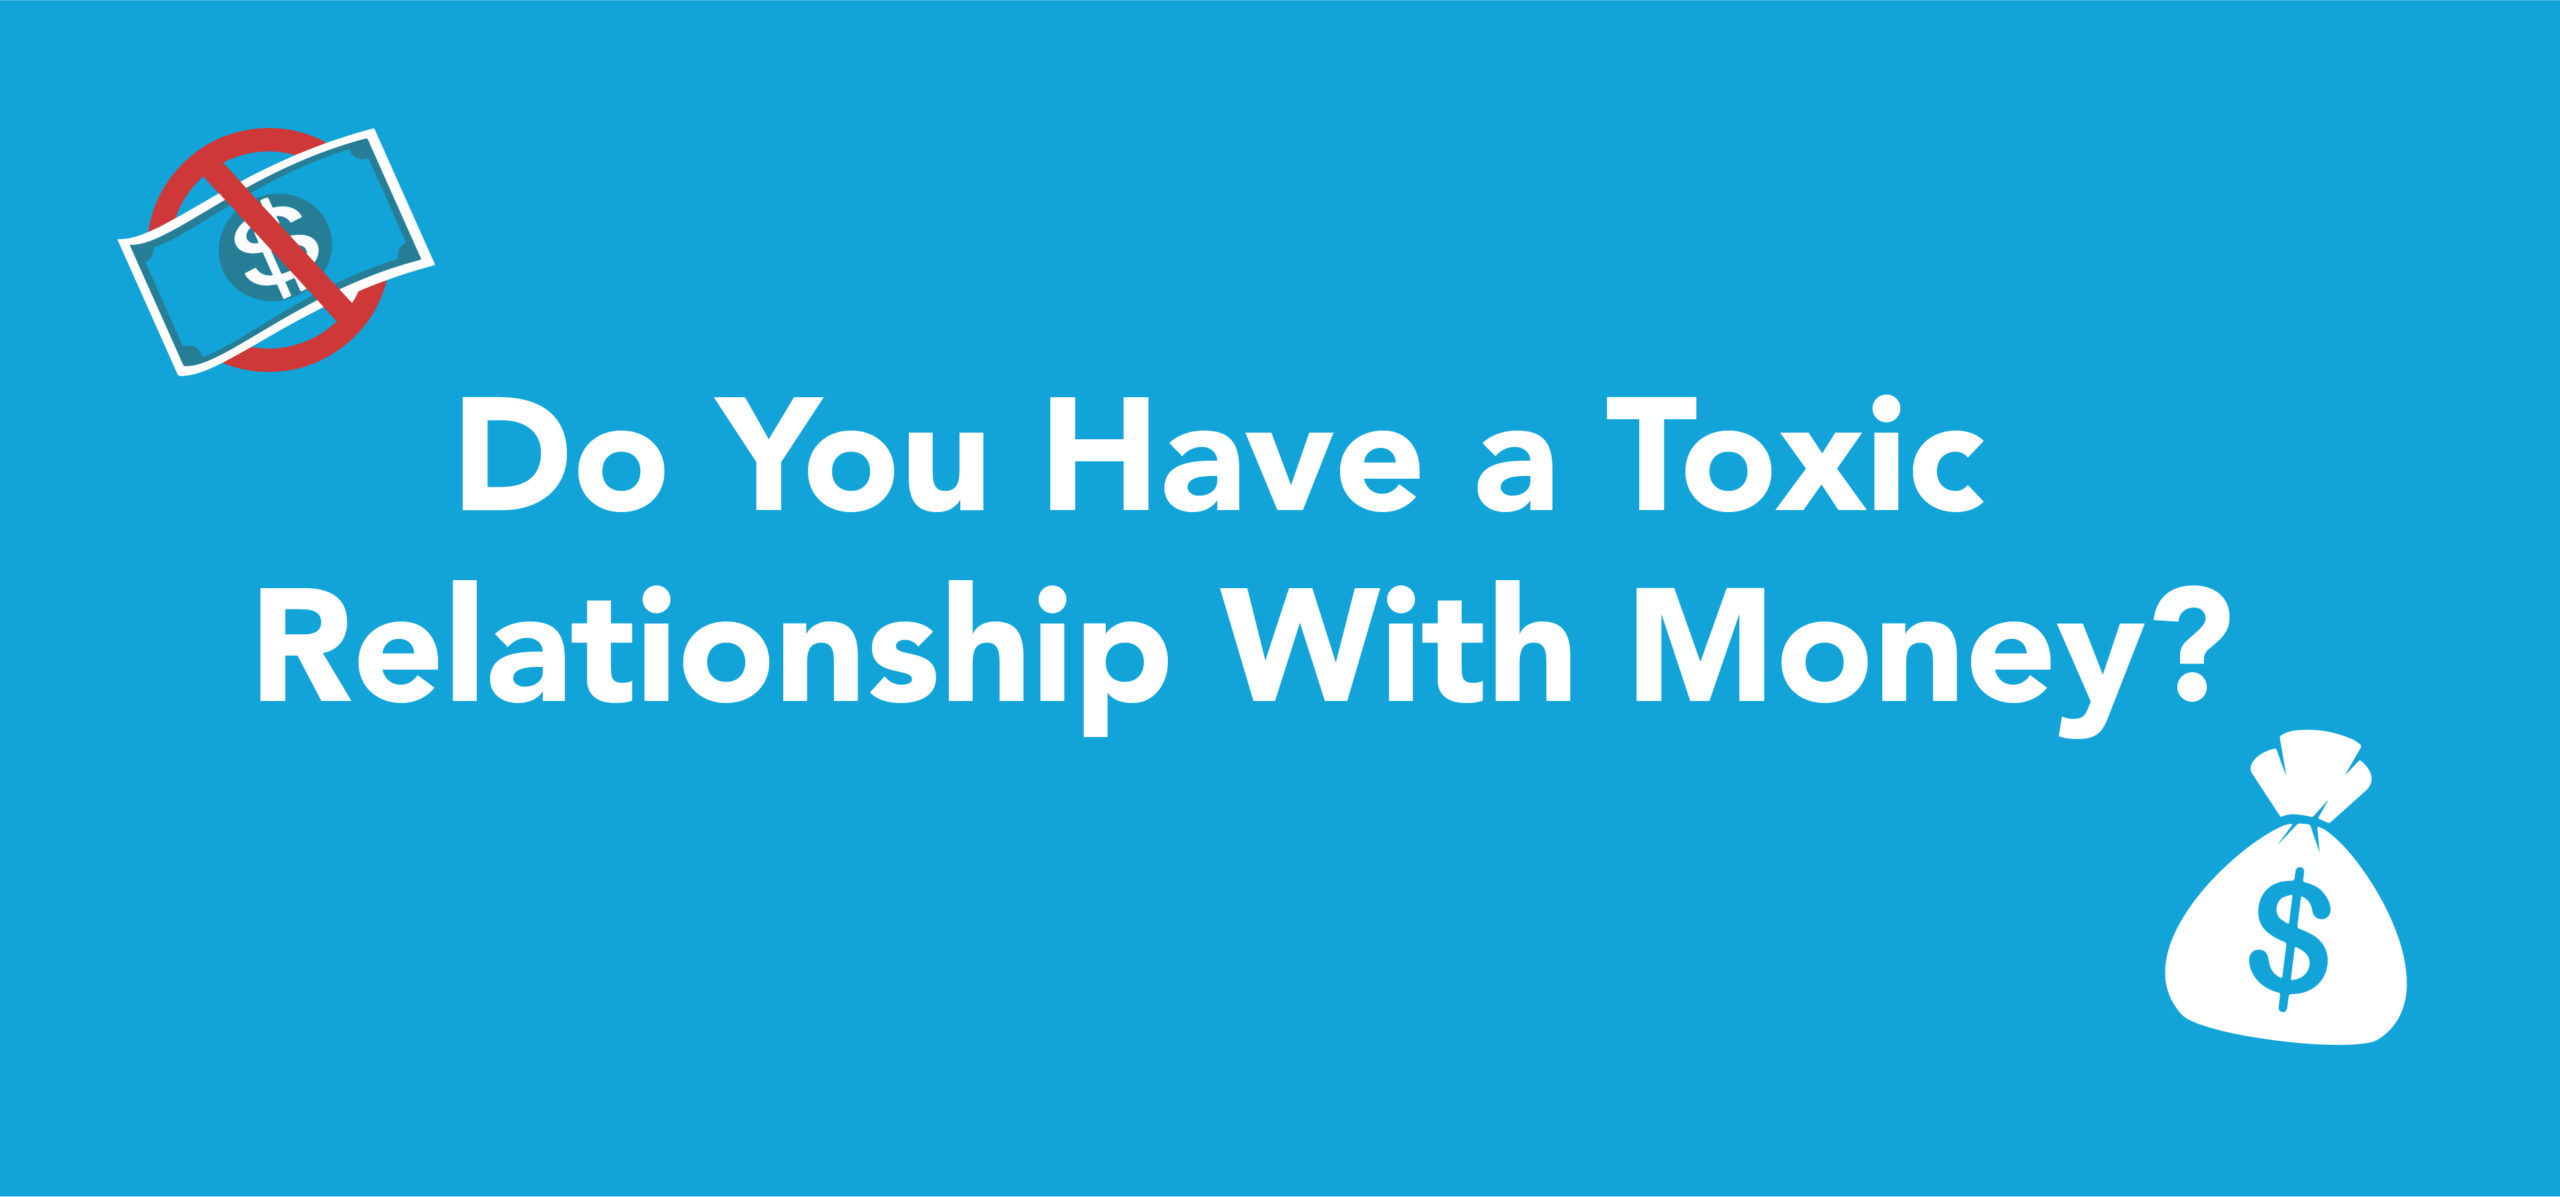 Do you have a toxic relationship with money